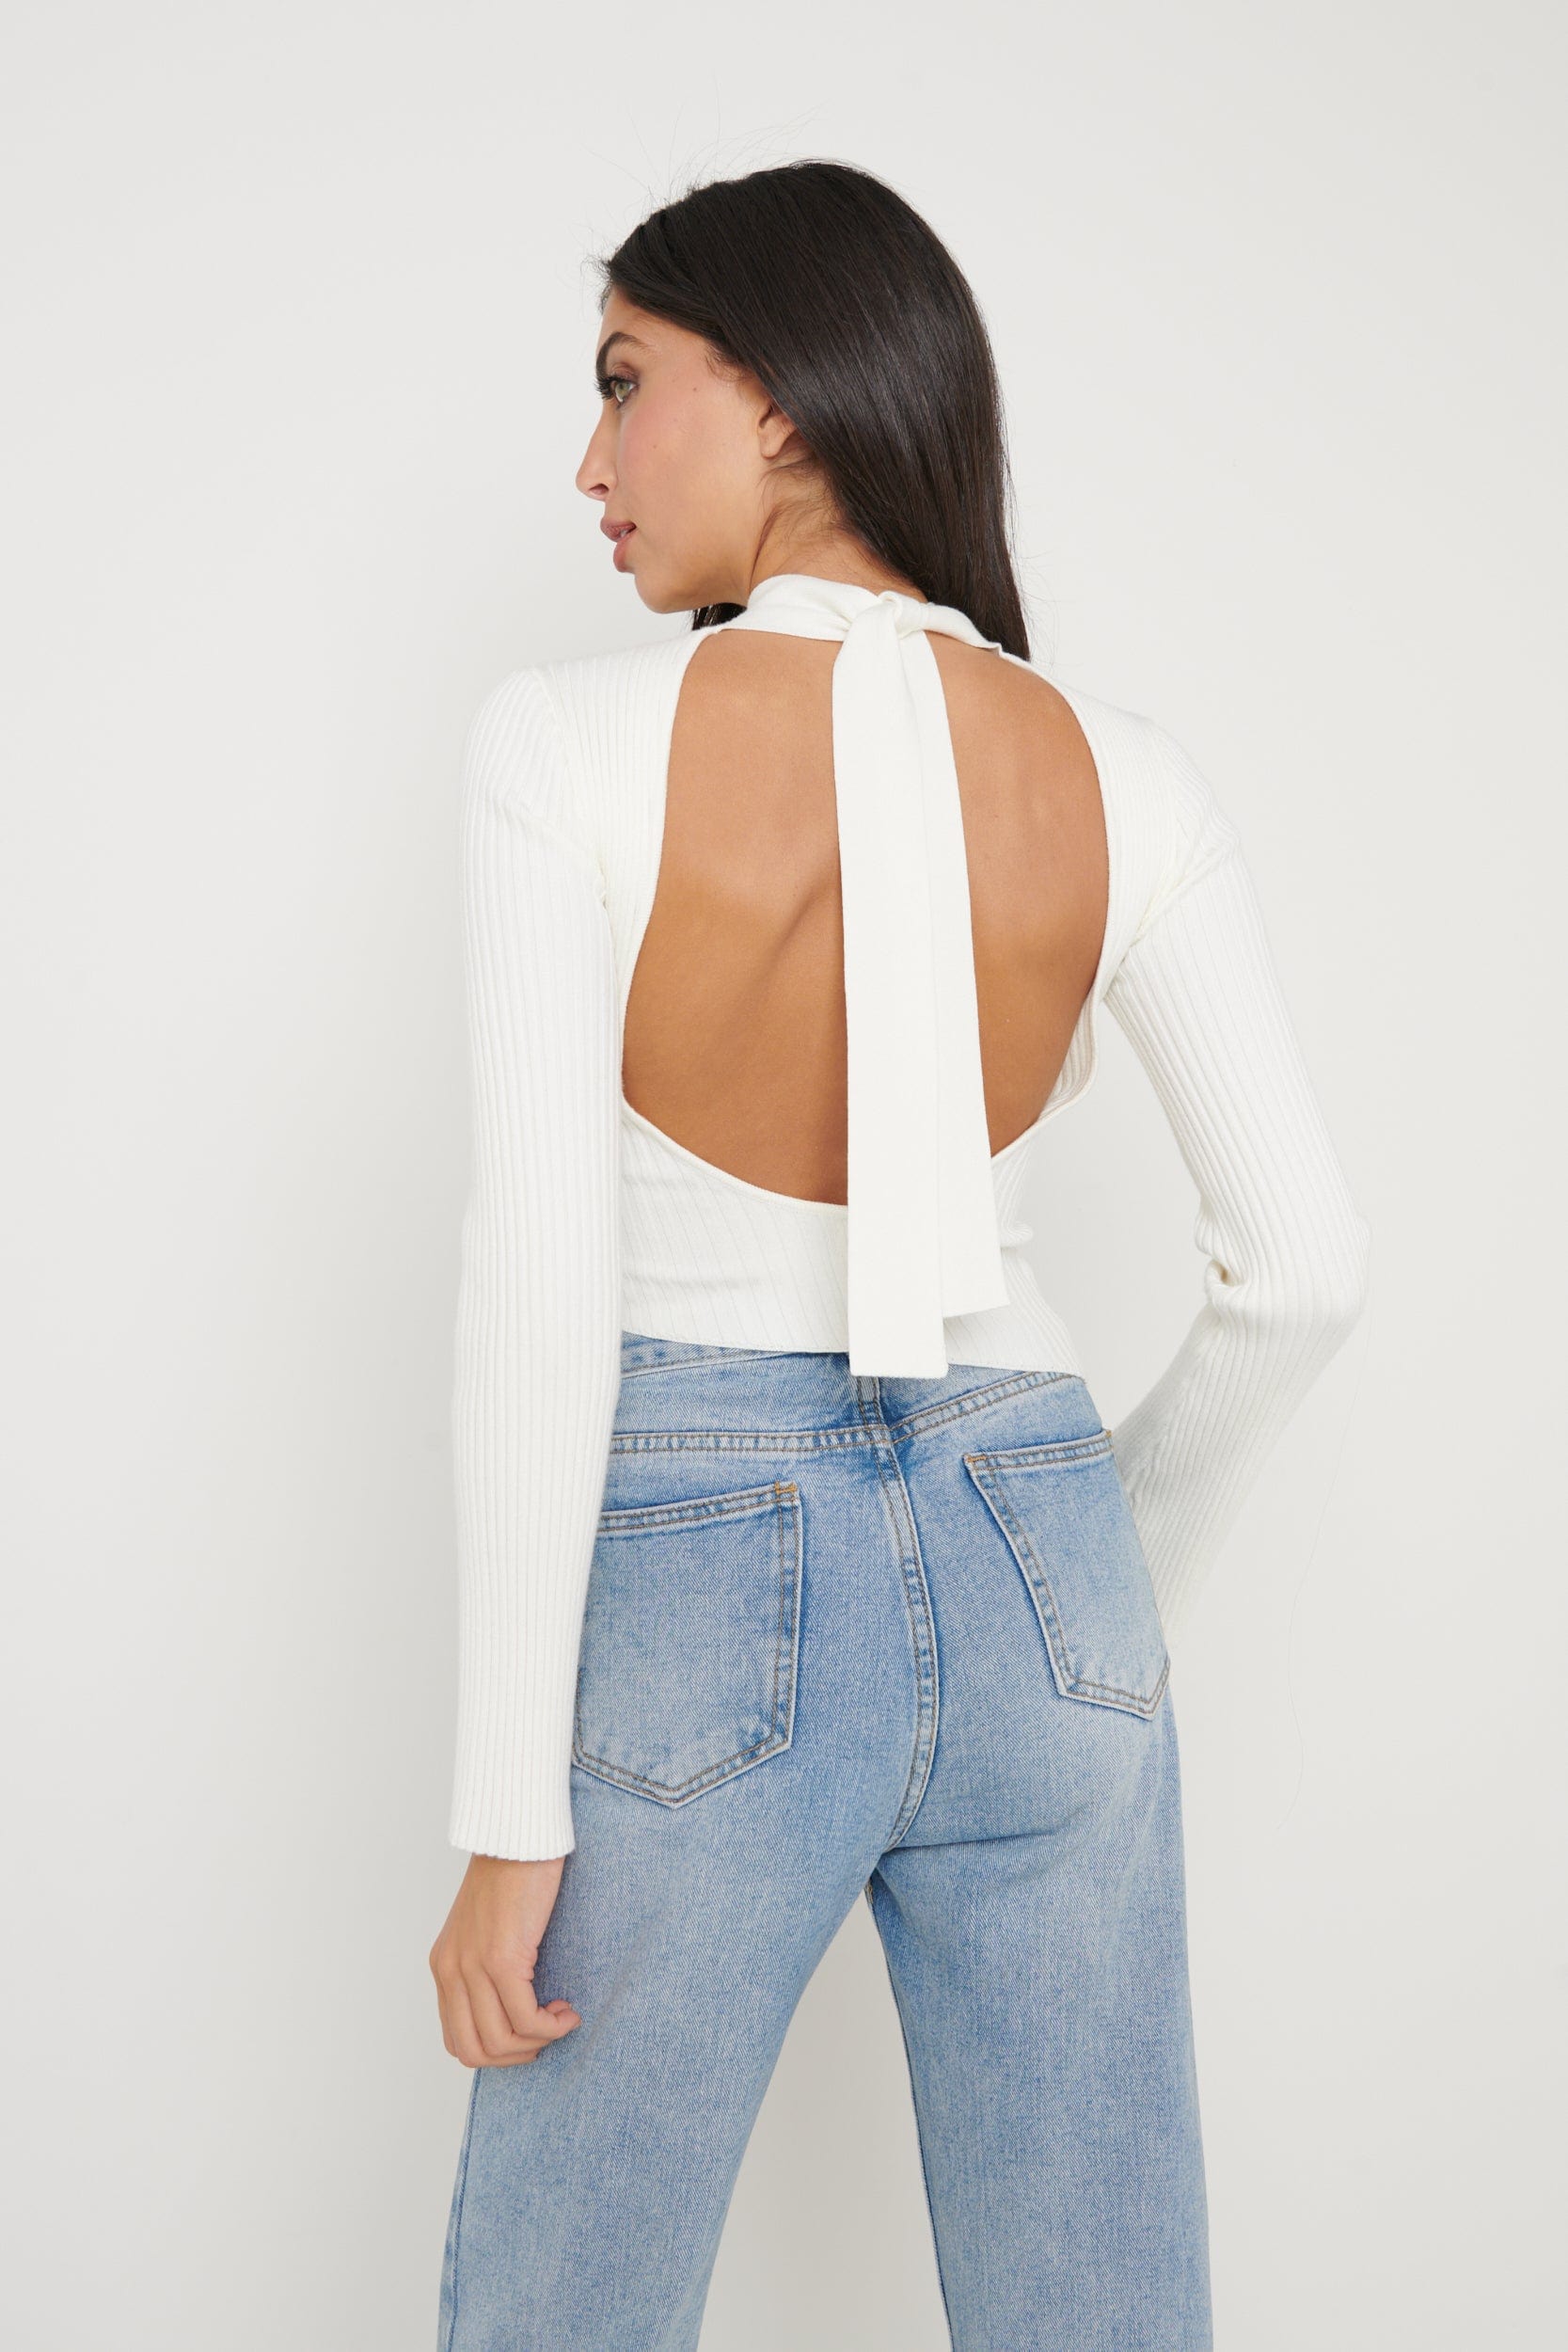 Lakelyn Backless High Neck Knit Top - Cream, S